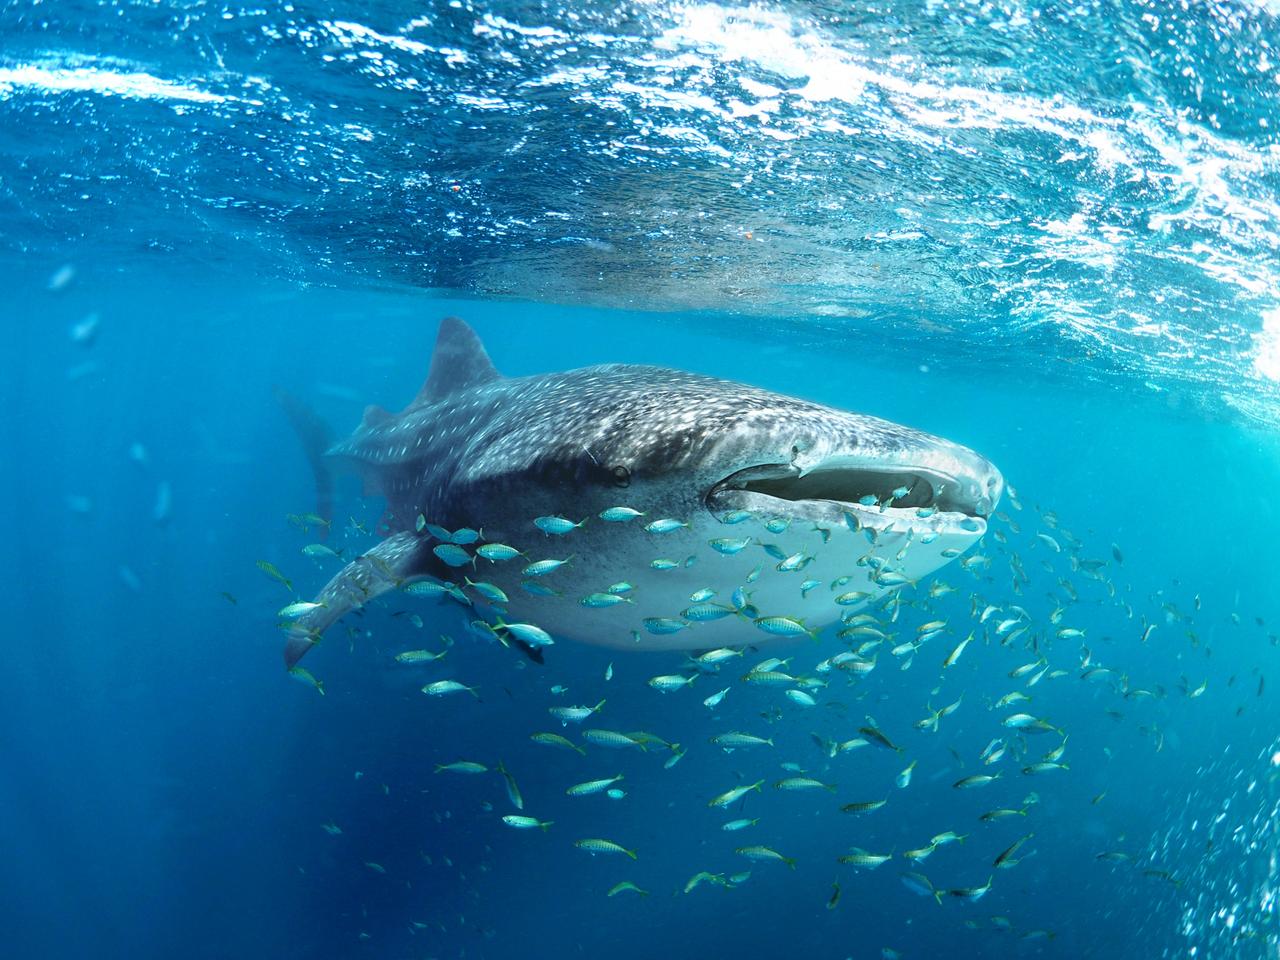 Whale shark (Rhincodon typus) and his little fish friends